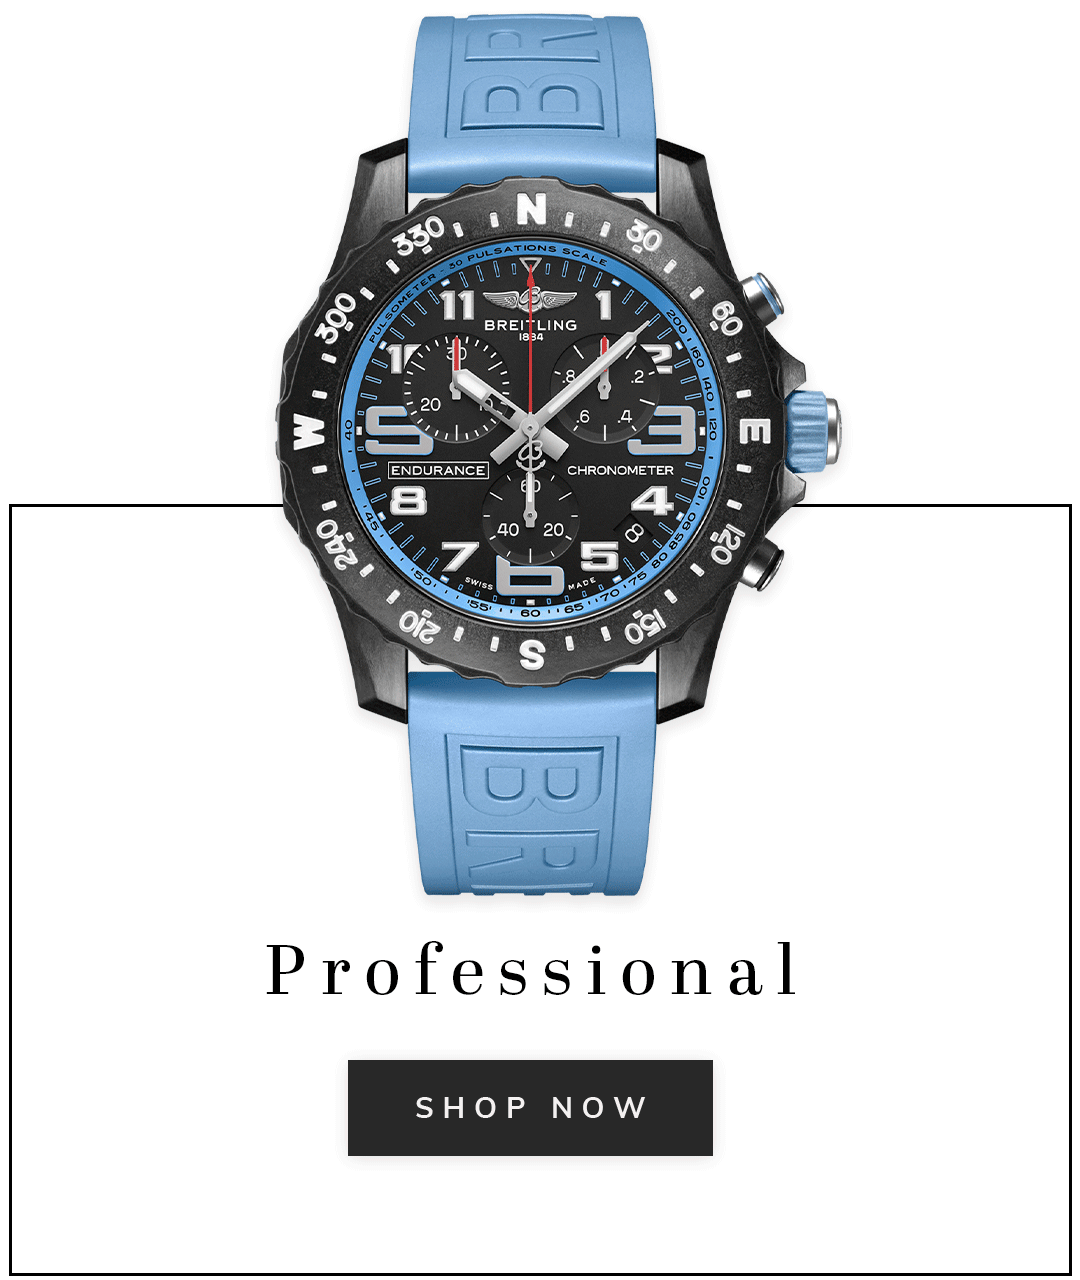 A Breitling Aerospace Evo watch with text professional collection shop now